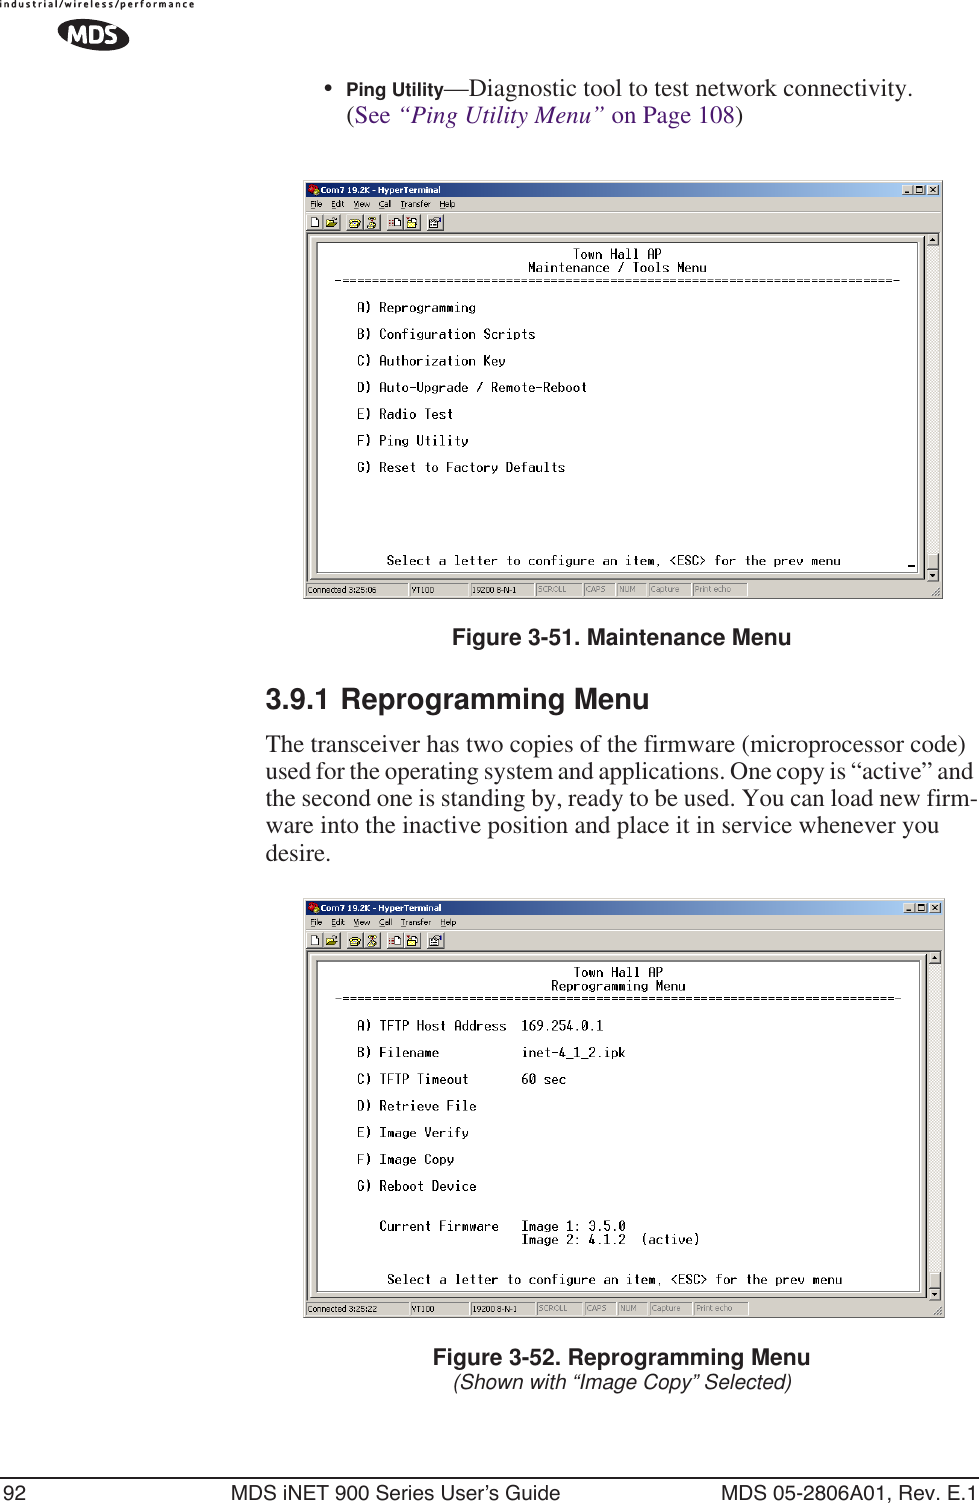 92 MDS iNET 900 Series User’s Guide MDS 05-2806A01, Rev. E.1•Ping Utility—Diagnostic tool to test network connectivity. (See “Ping Utility Menu” on Page 108)Figure 3-51. Maintenance Menu3.9.1 Reprogramming MenuThe transceiver has two copies of the firmware (microprocessor code) used for the operating system and applications. One copy is “active” and the second one is standing by, ready to be used. You can load new firm-ware into the inactive position and place it in service whenever you desire.Figure 3-52. Reprogramming Menu(Shown with “Image Copy” Selected)